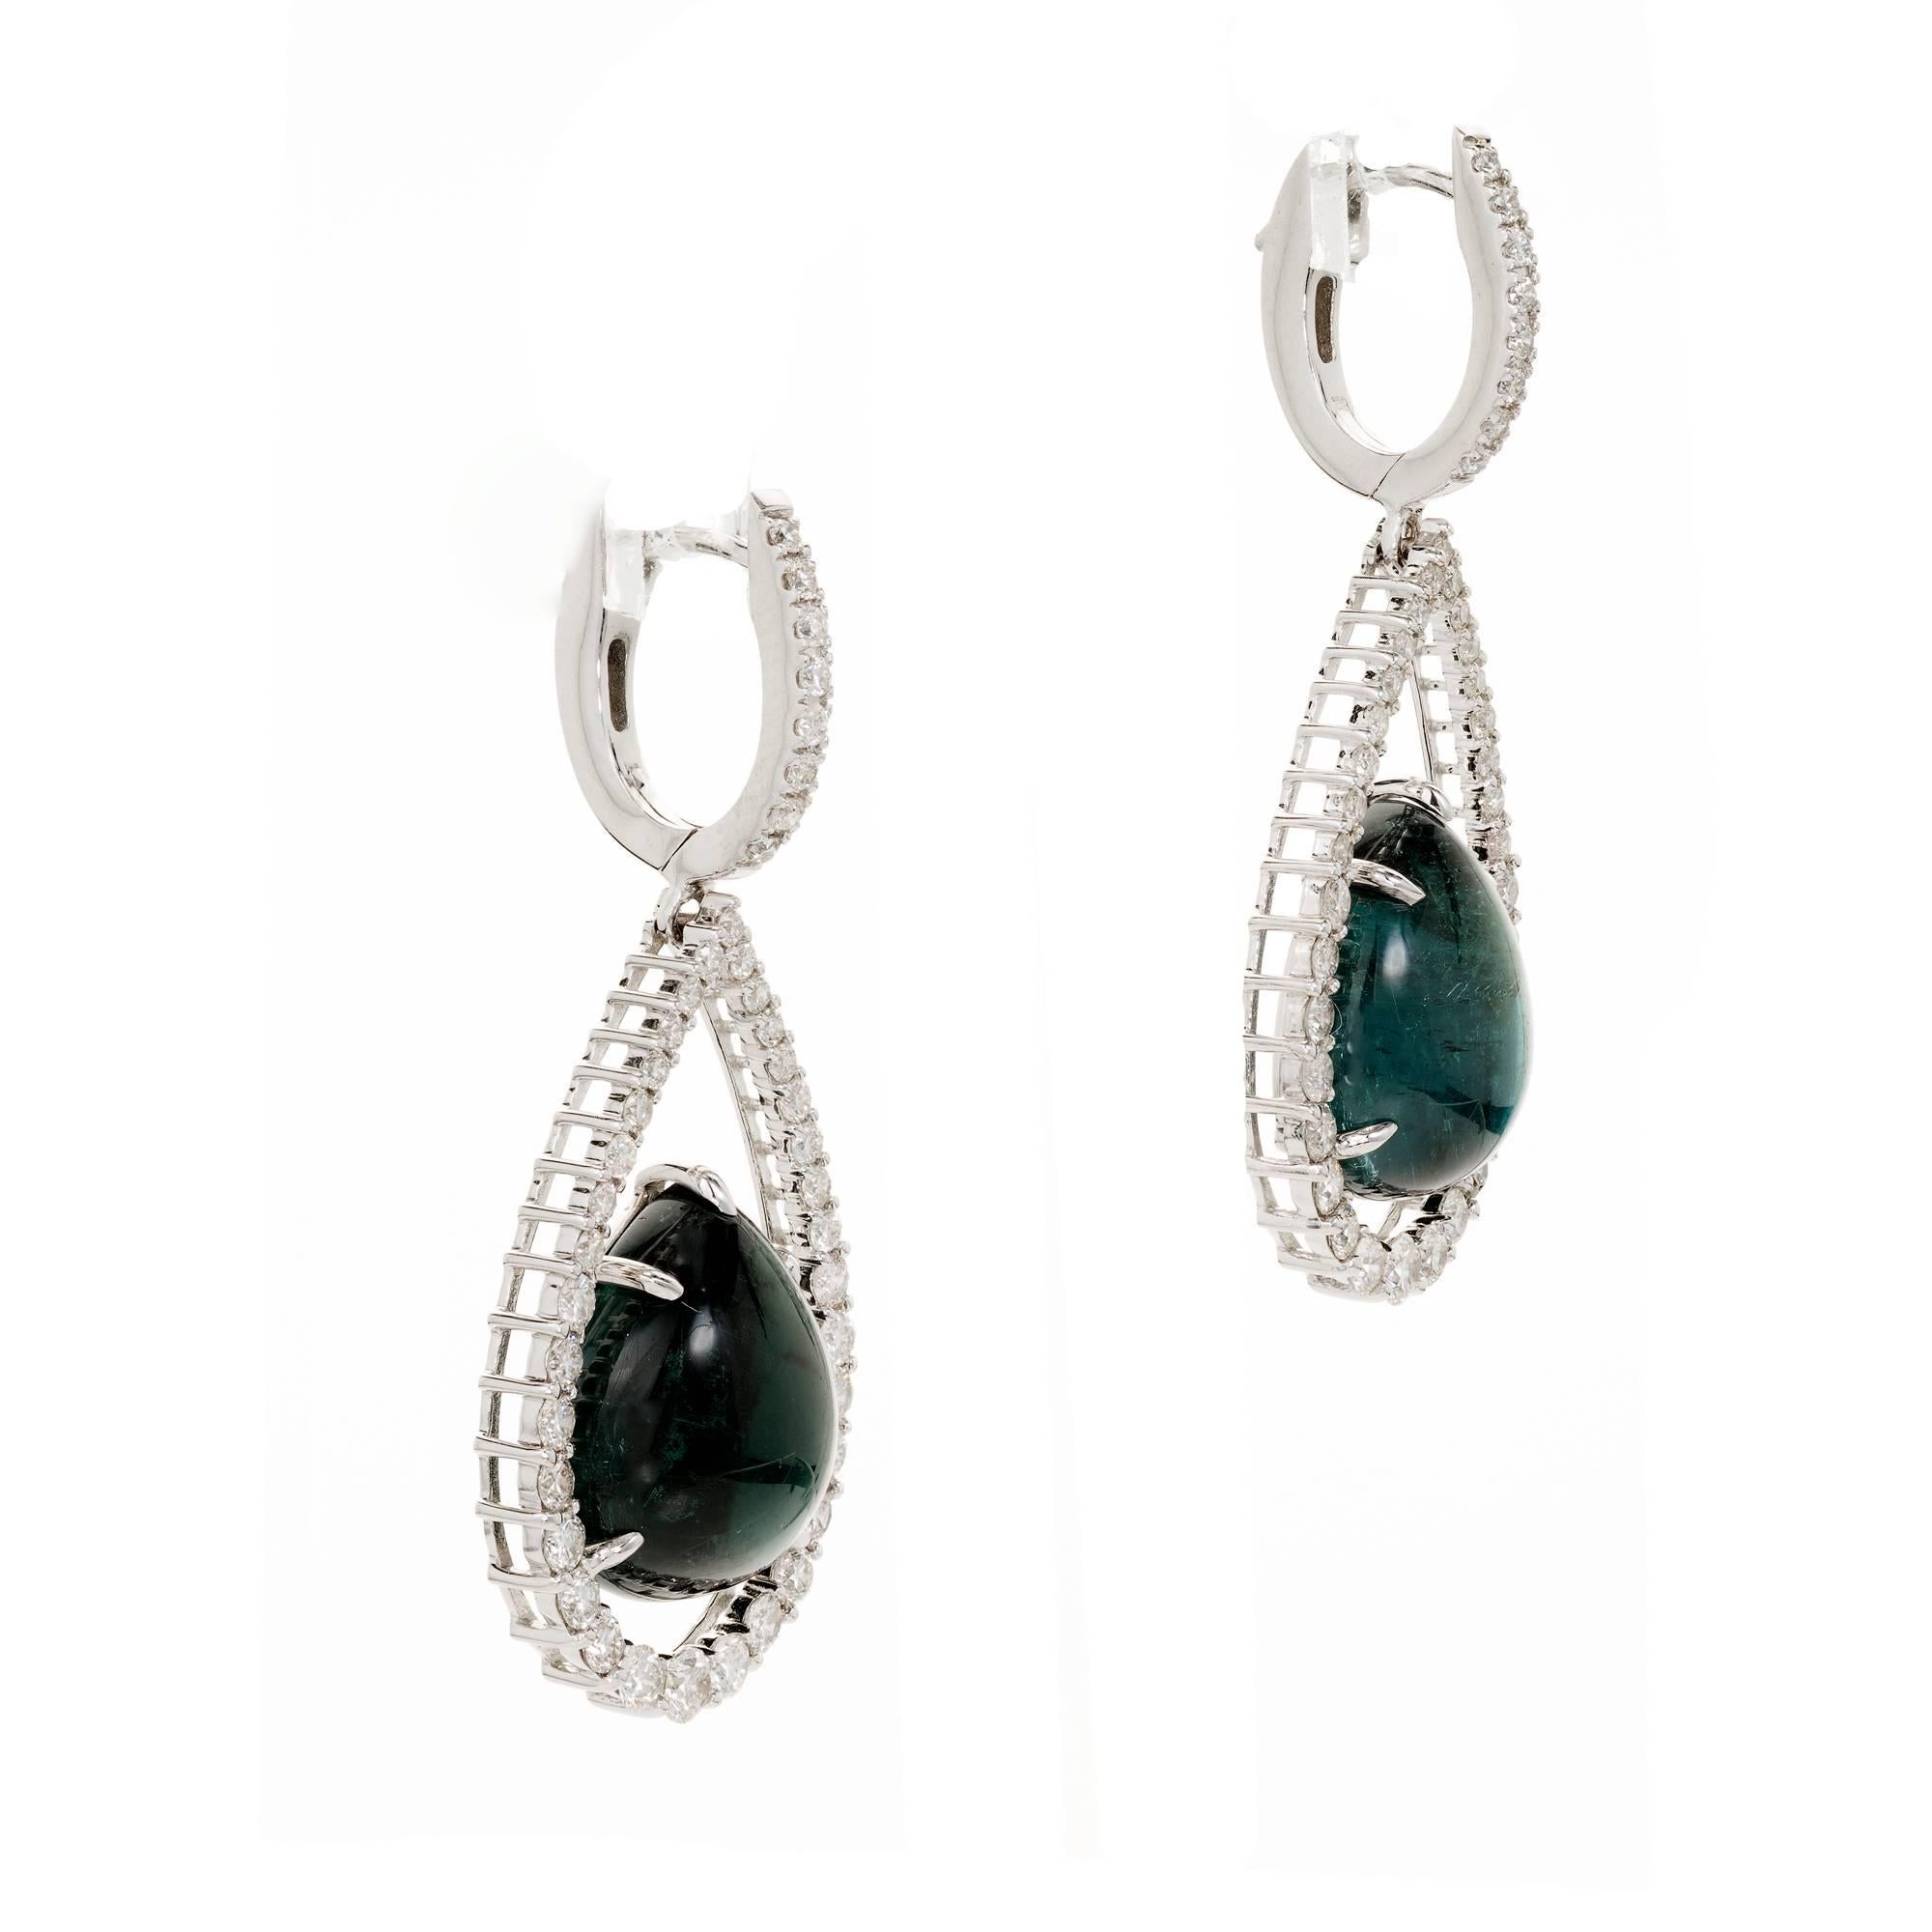 Peter Suchy 15.84 Carat Blue Cabochon Tourmaline Diamond Gold Dangle Earrings In Good Condition For Sale In Stamford, CT